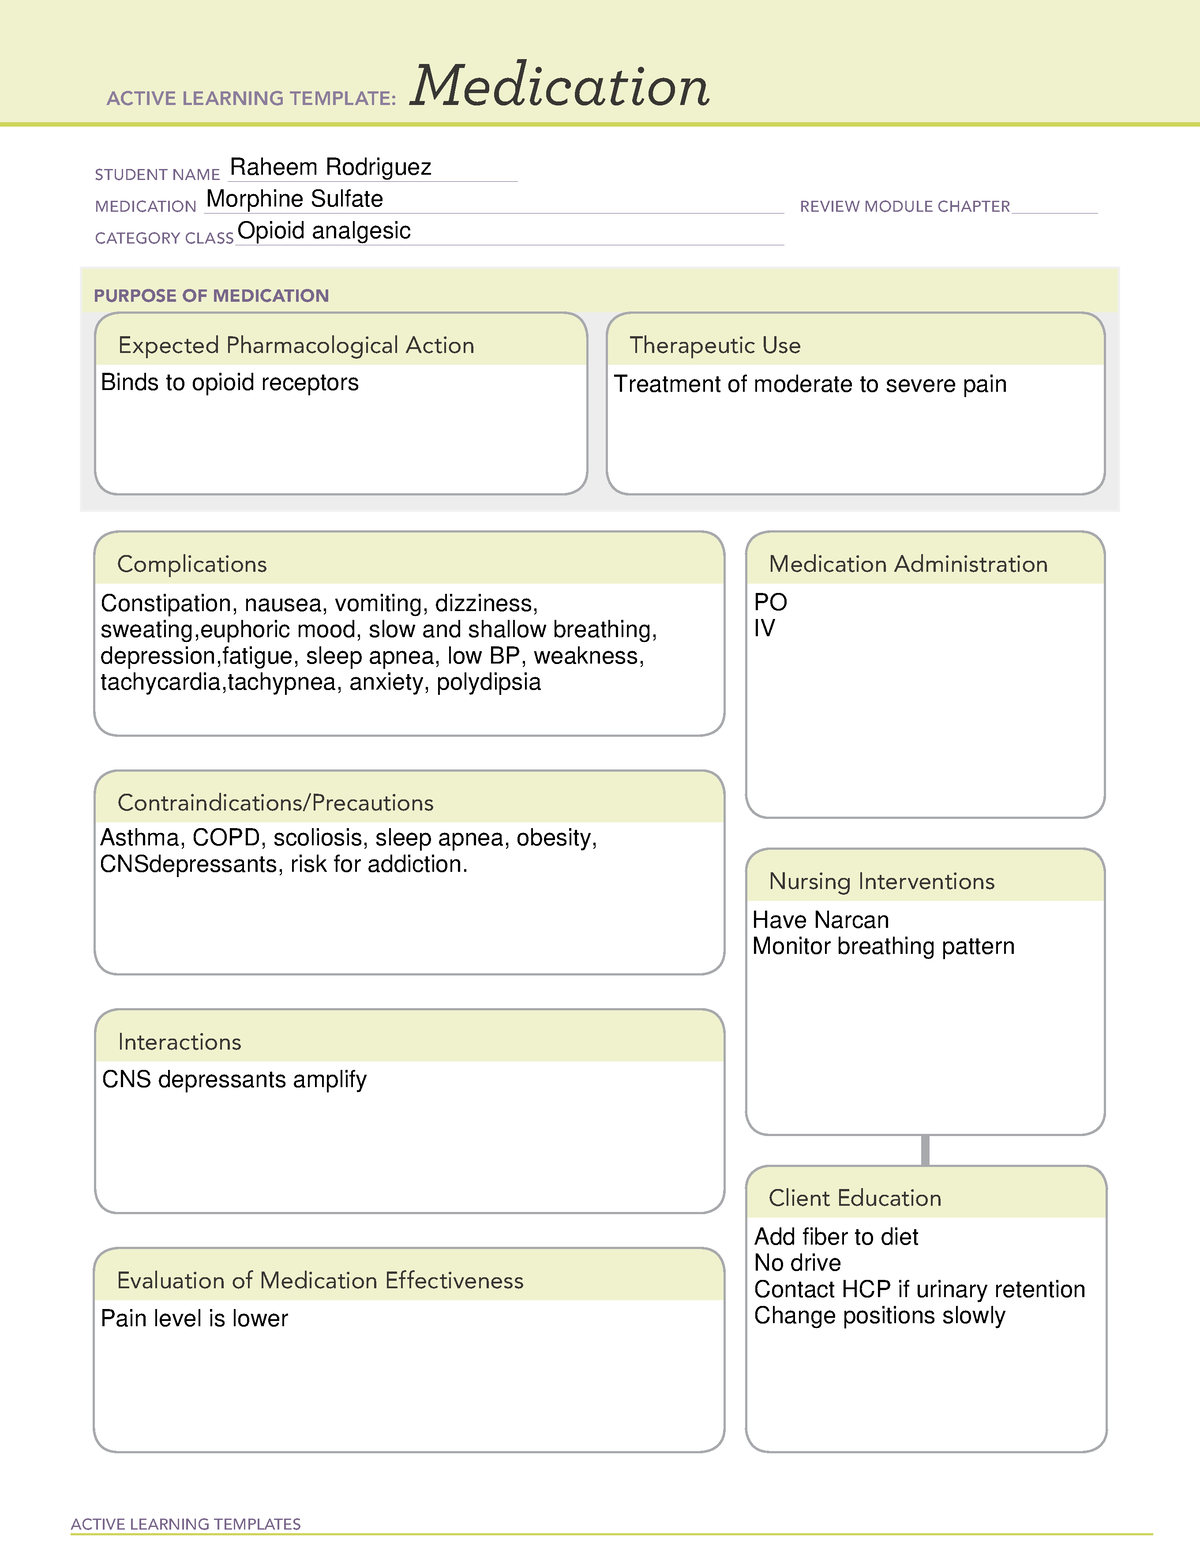 ATI medication template Morphine ACTIVE LEARNING TEMPLATES